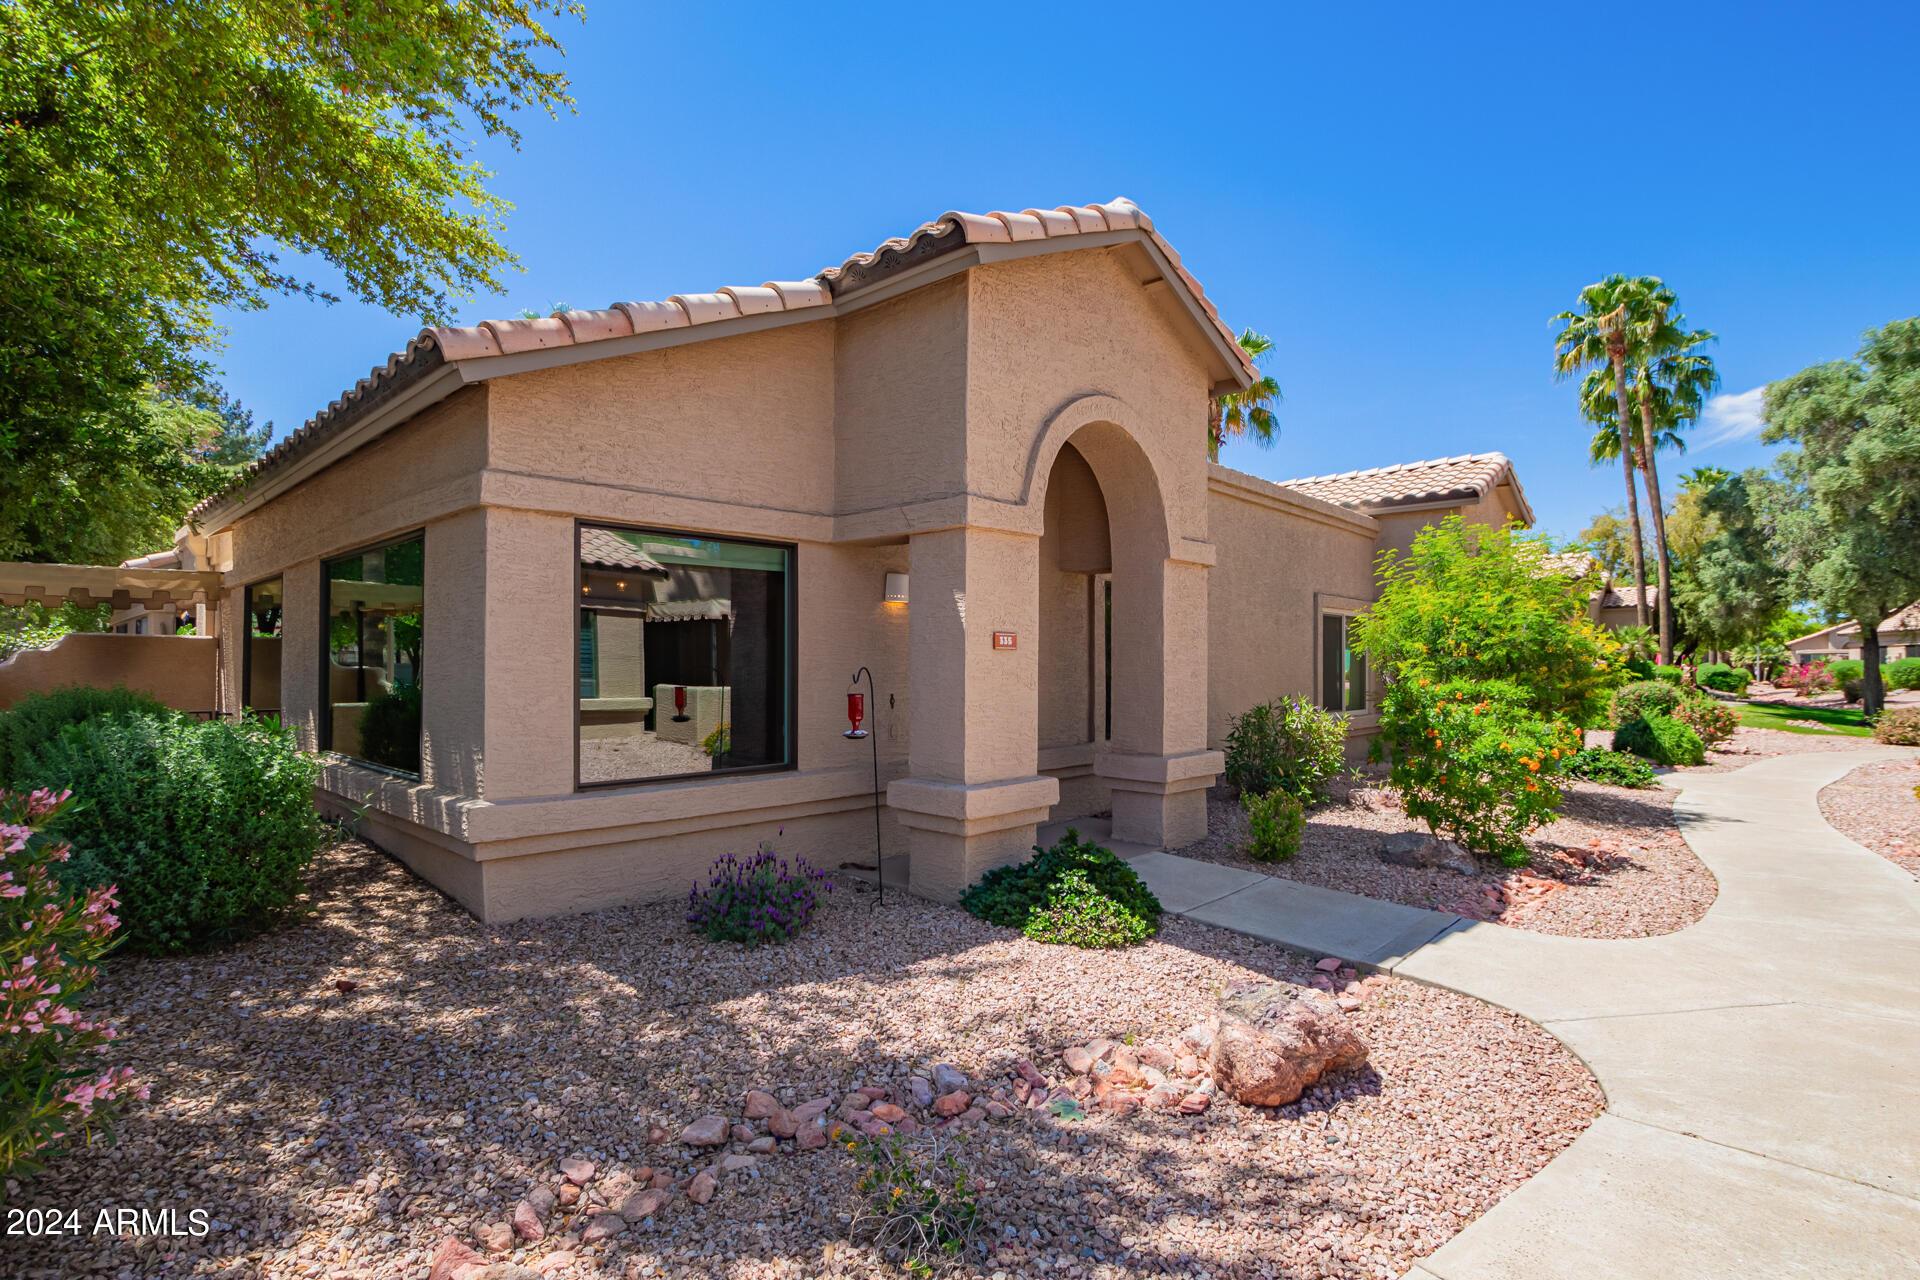 Photo one of 14300 W Bell Rd # 335 Surprise AZ 85374 | MLS 6693192